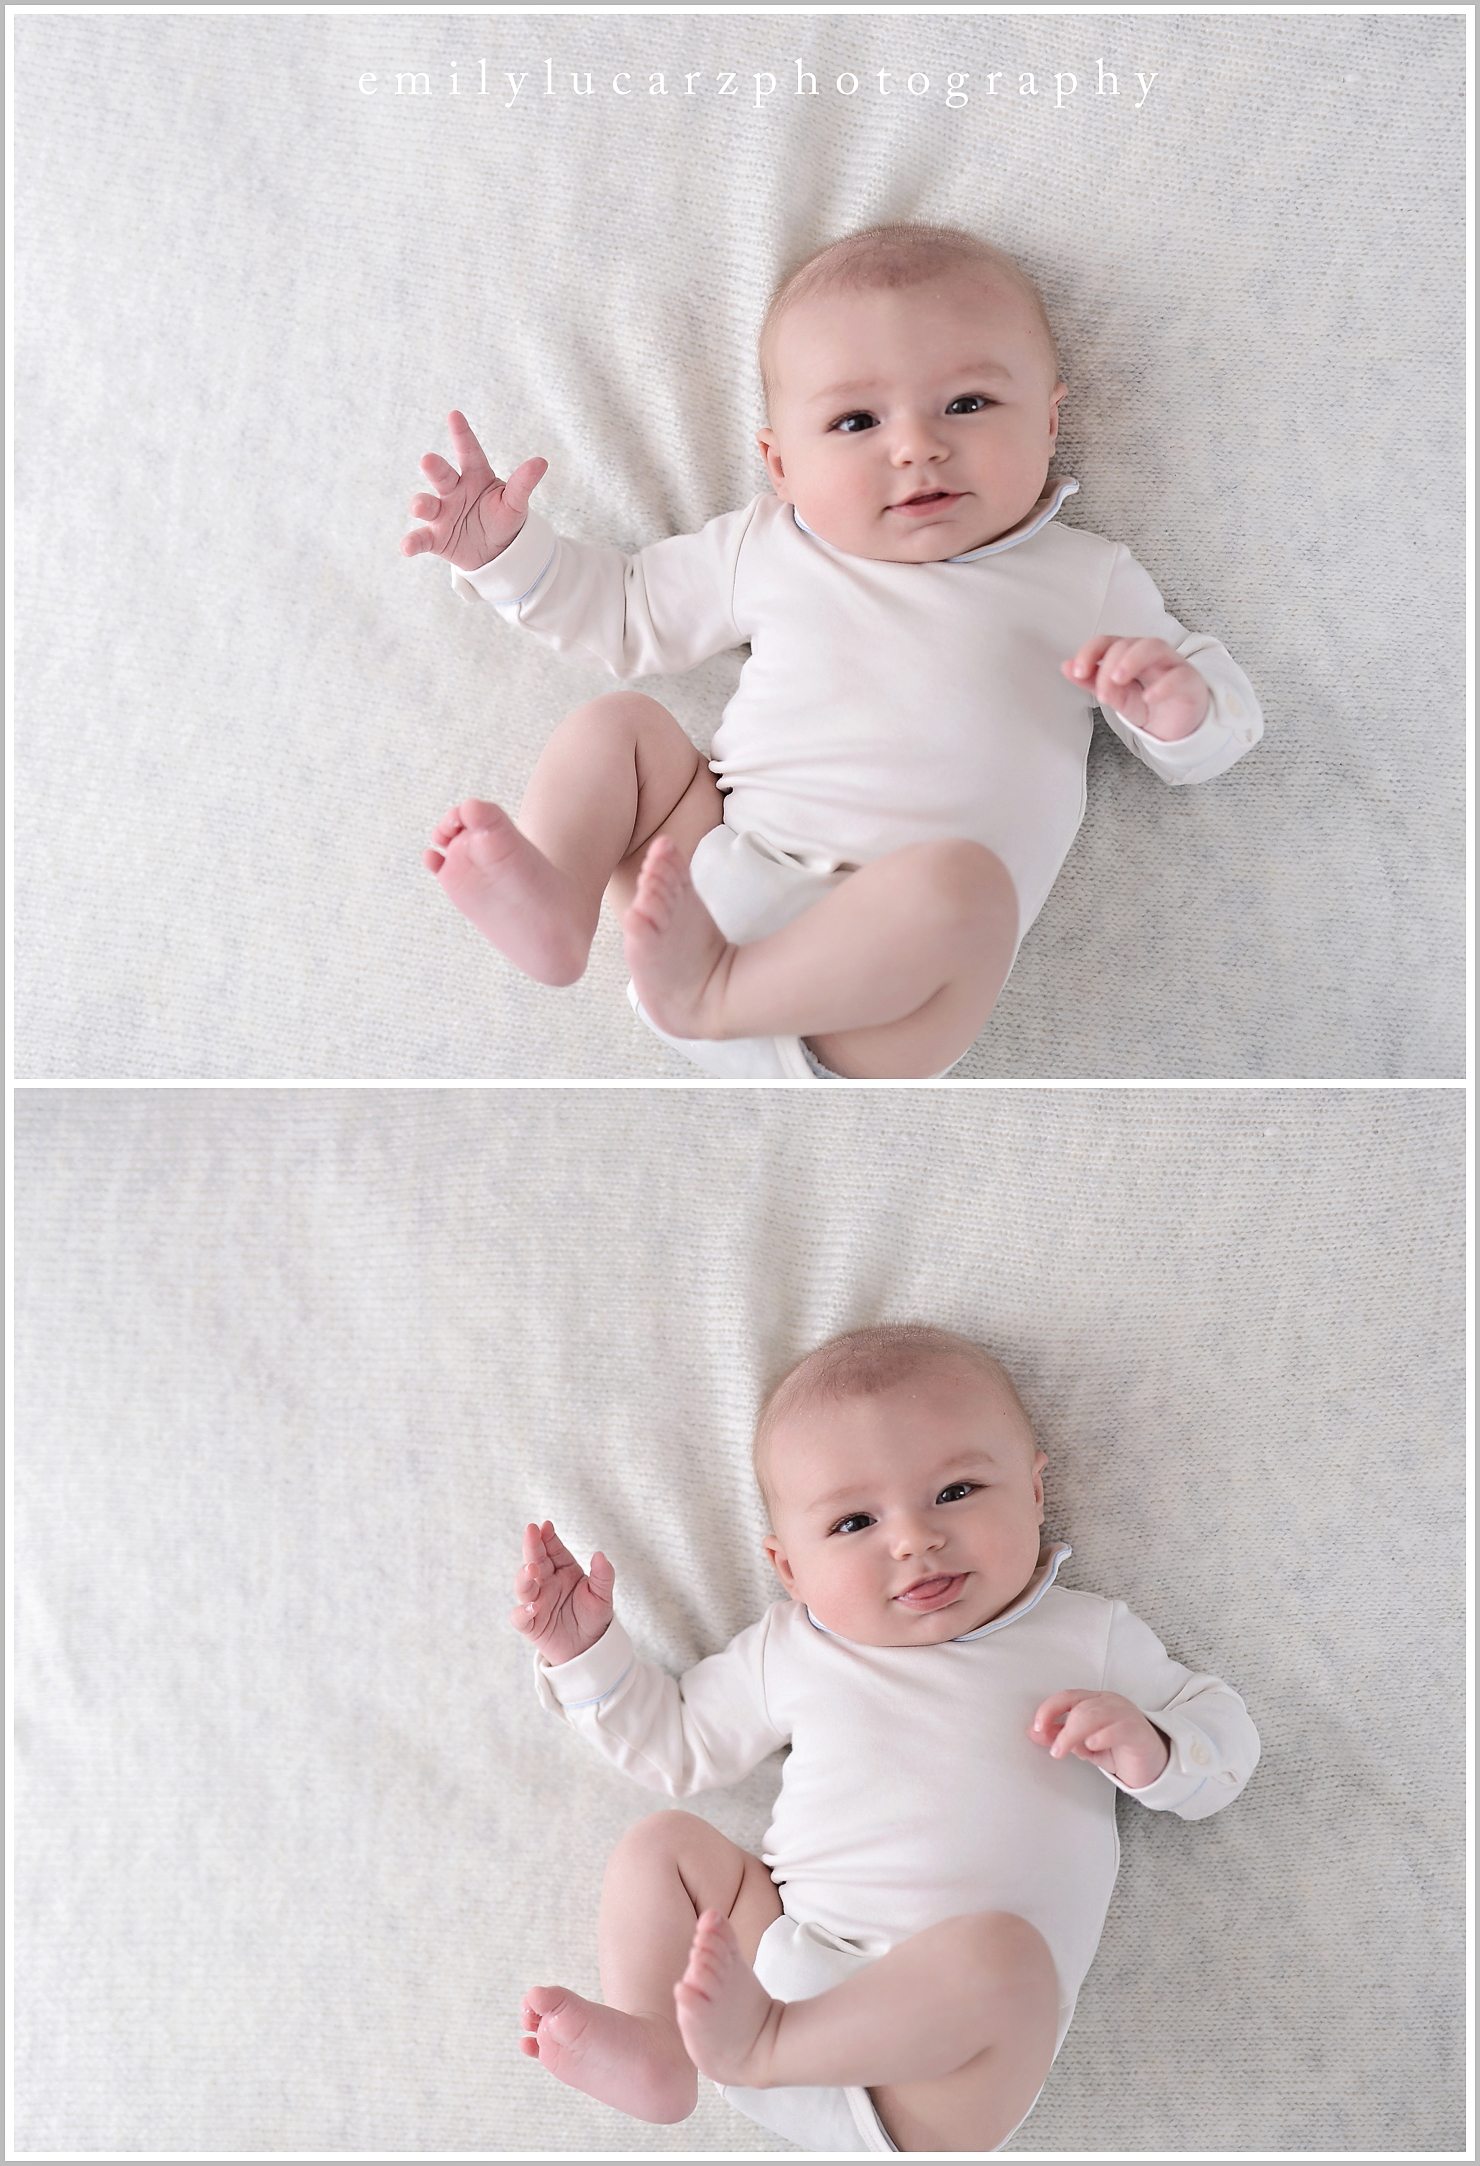 St. Louis baby photographer. Cute baby